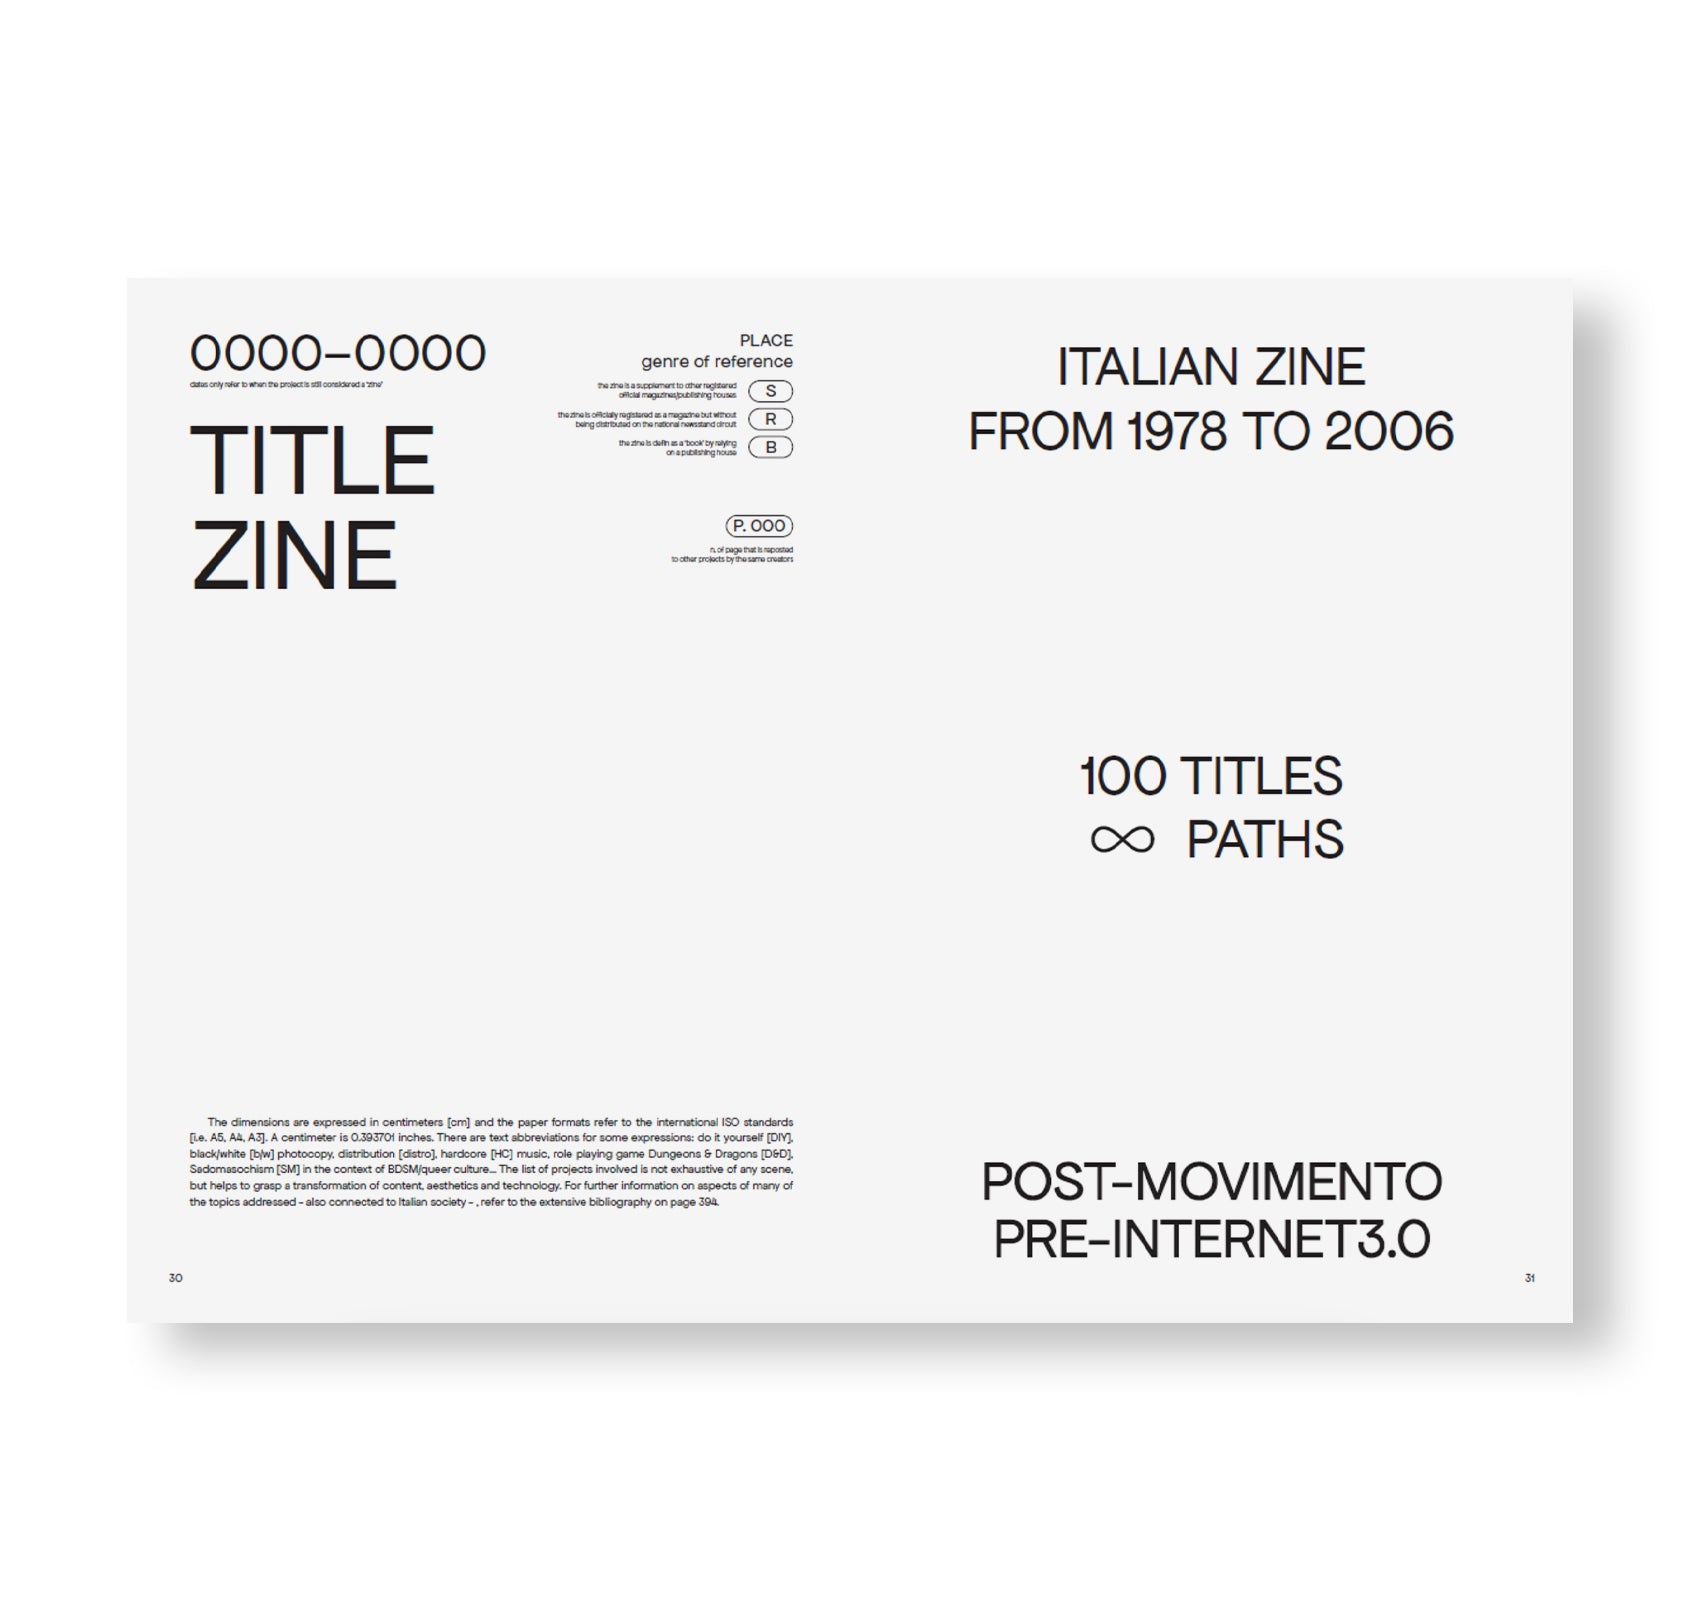 OUT OF THE GRID – ITALIAN ZINE 1978-2006